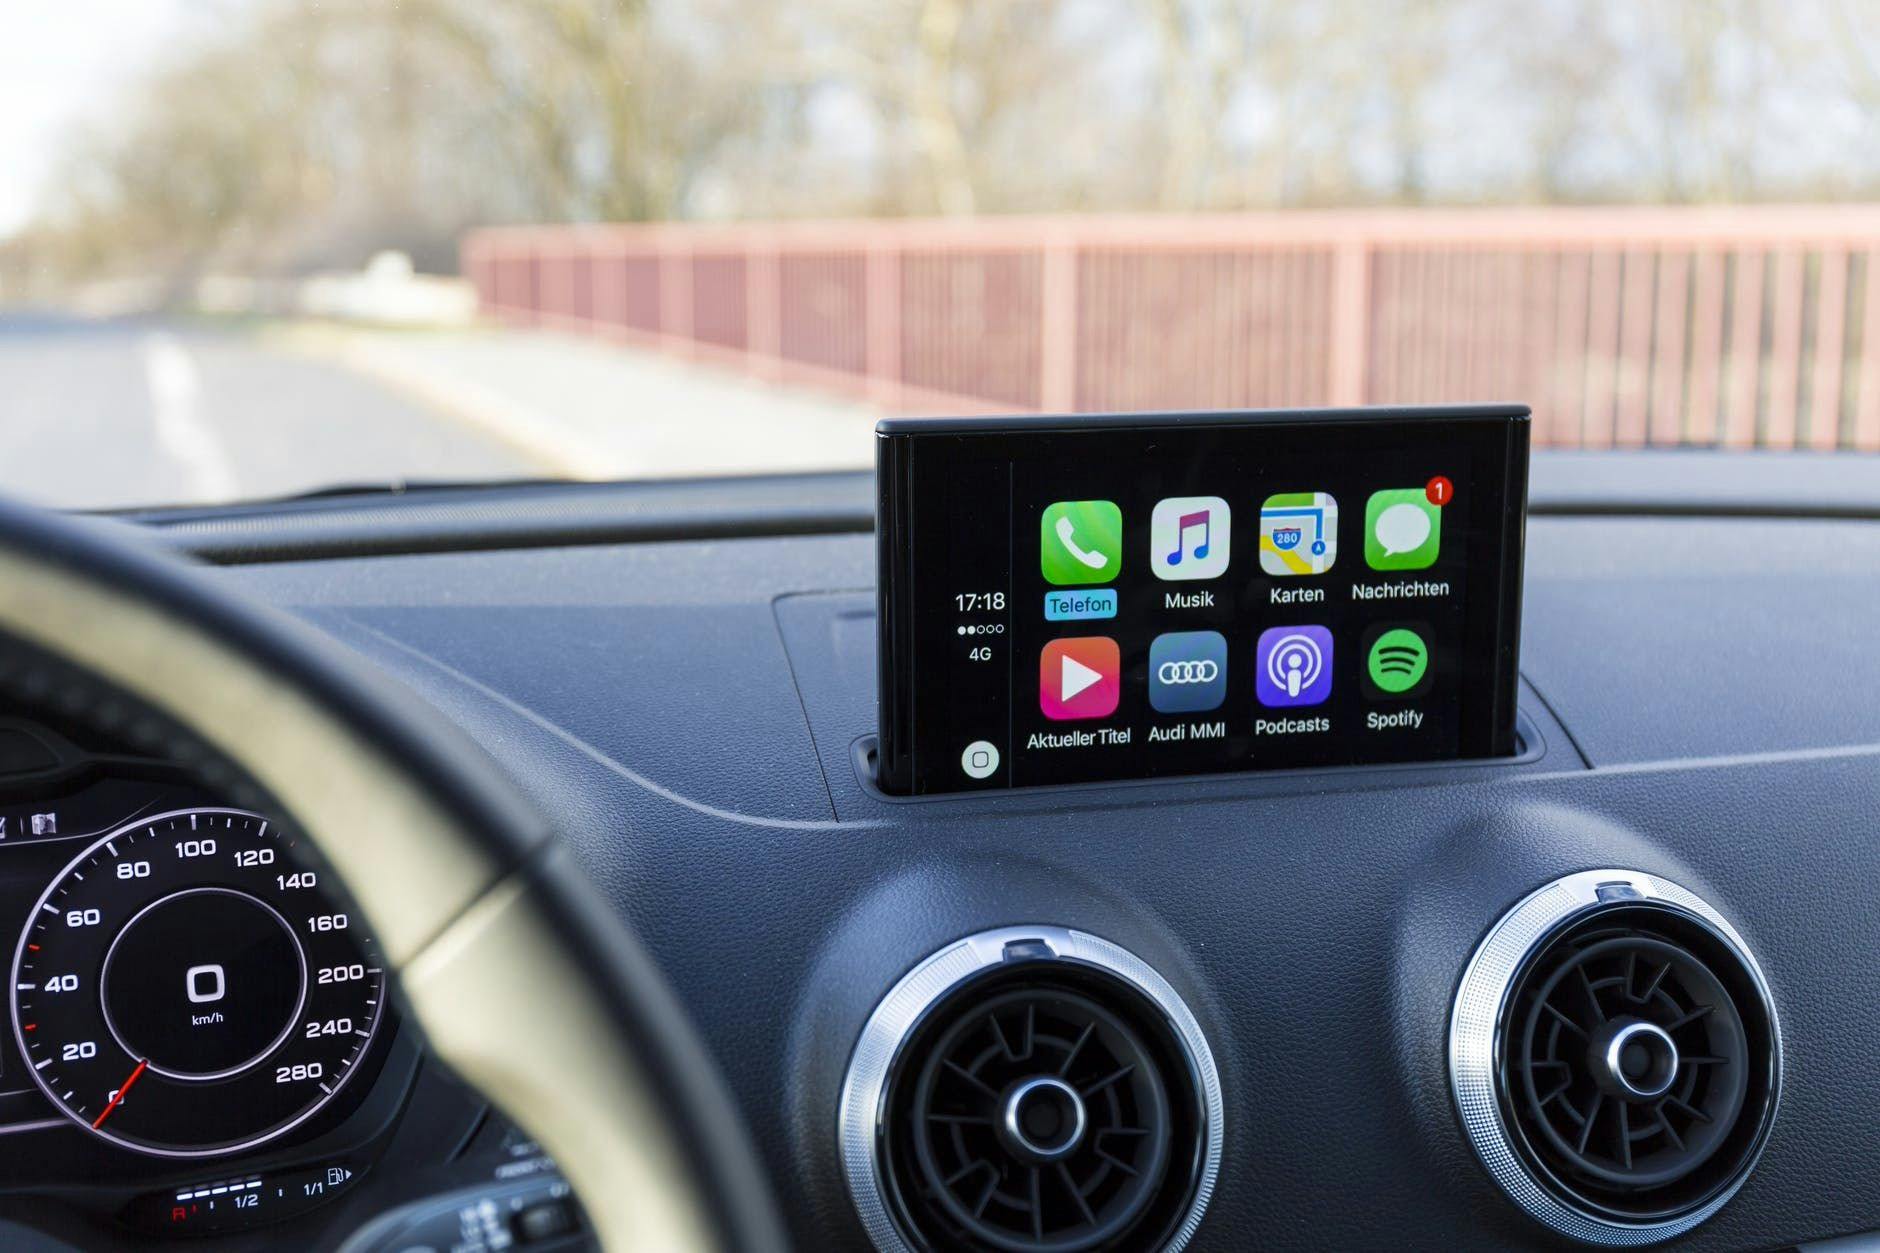 19 solutions to fix CarPlay not working in your car or your iPhone